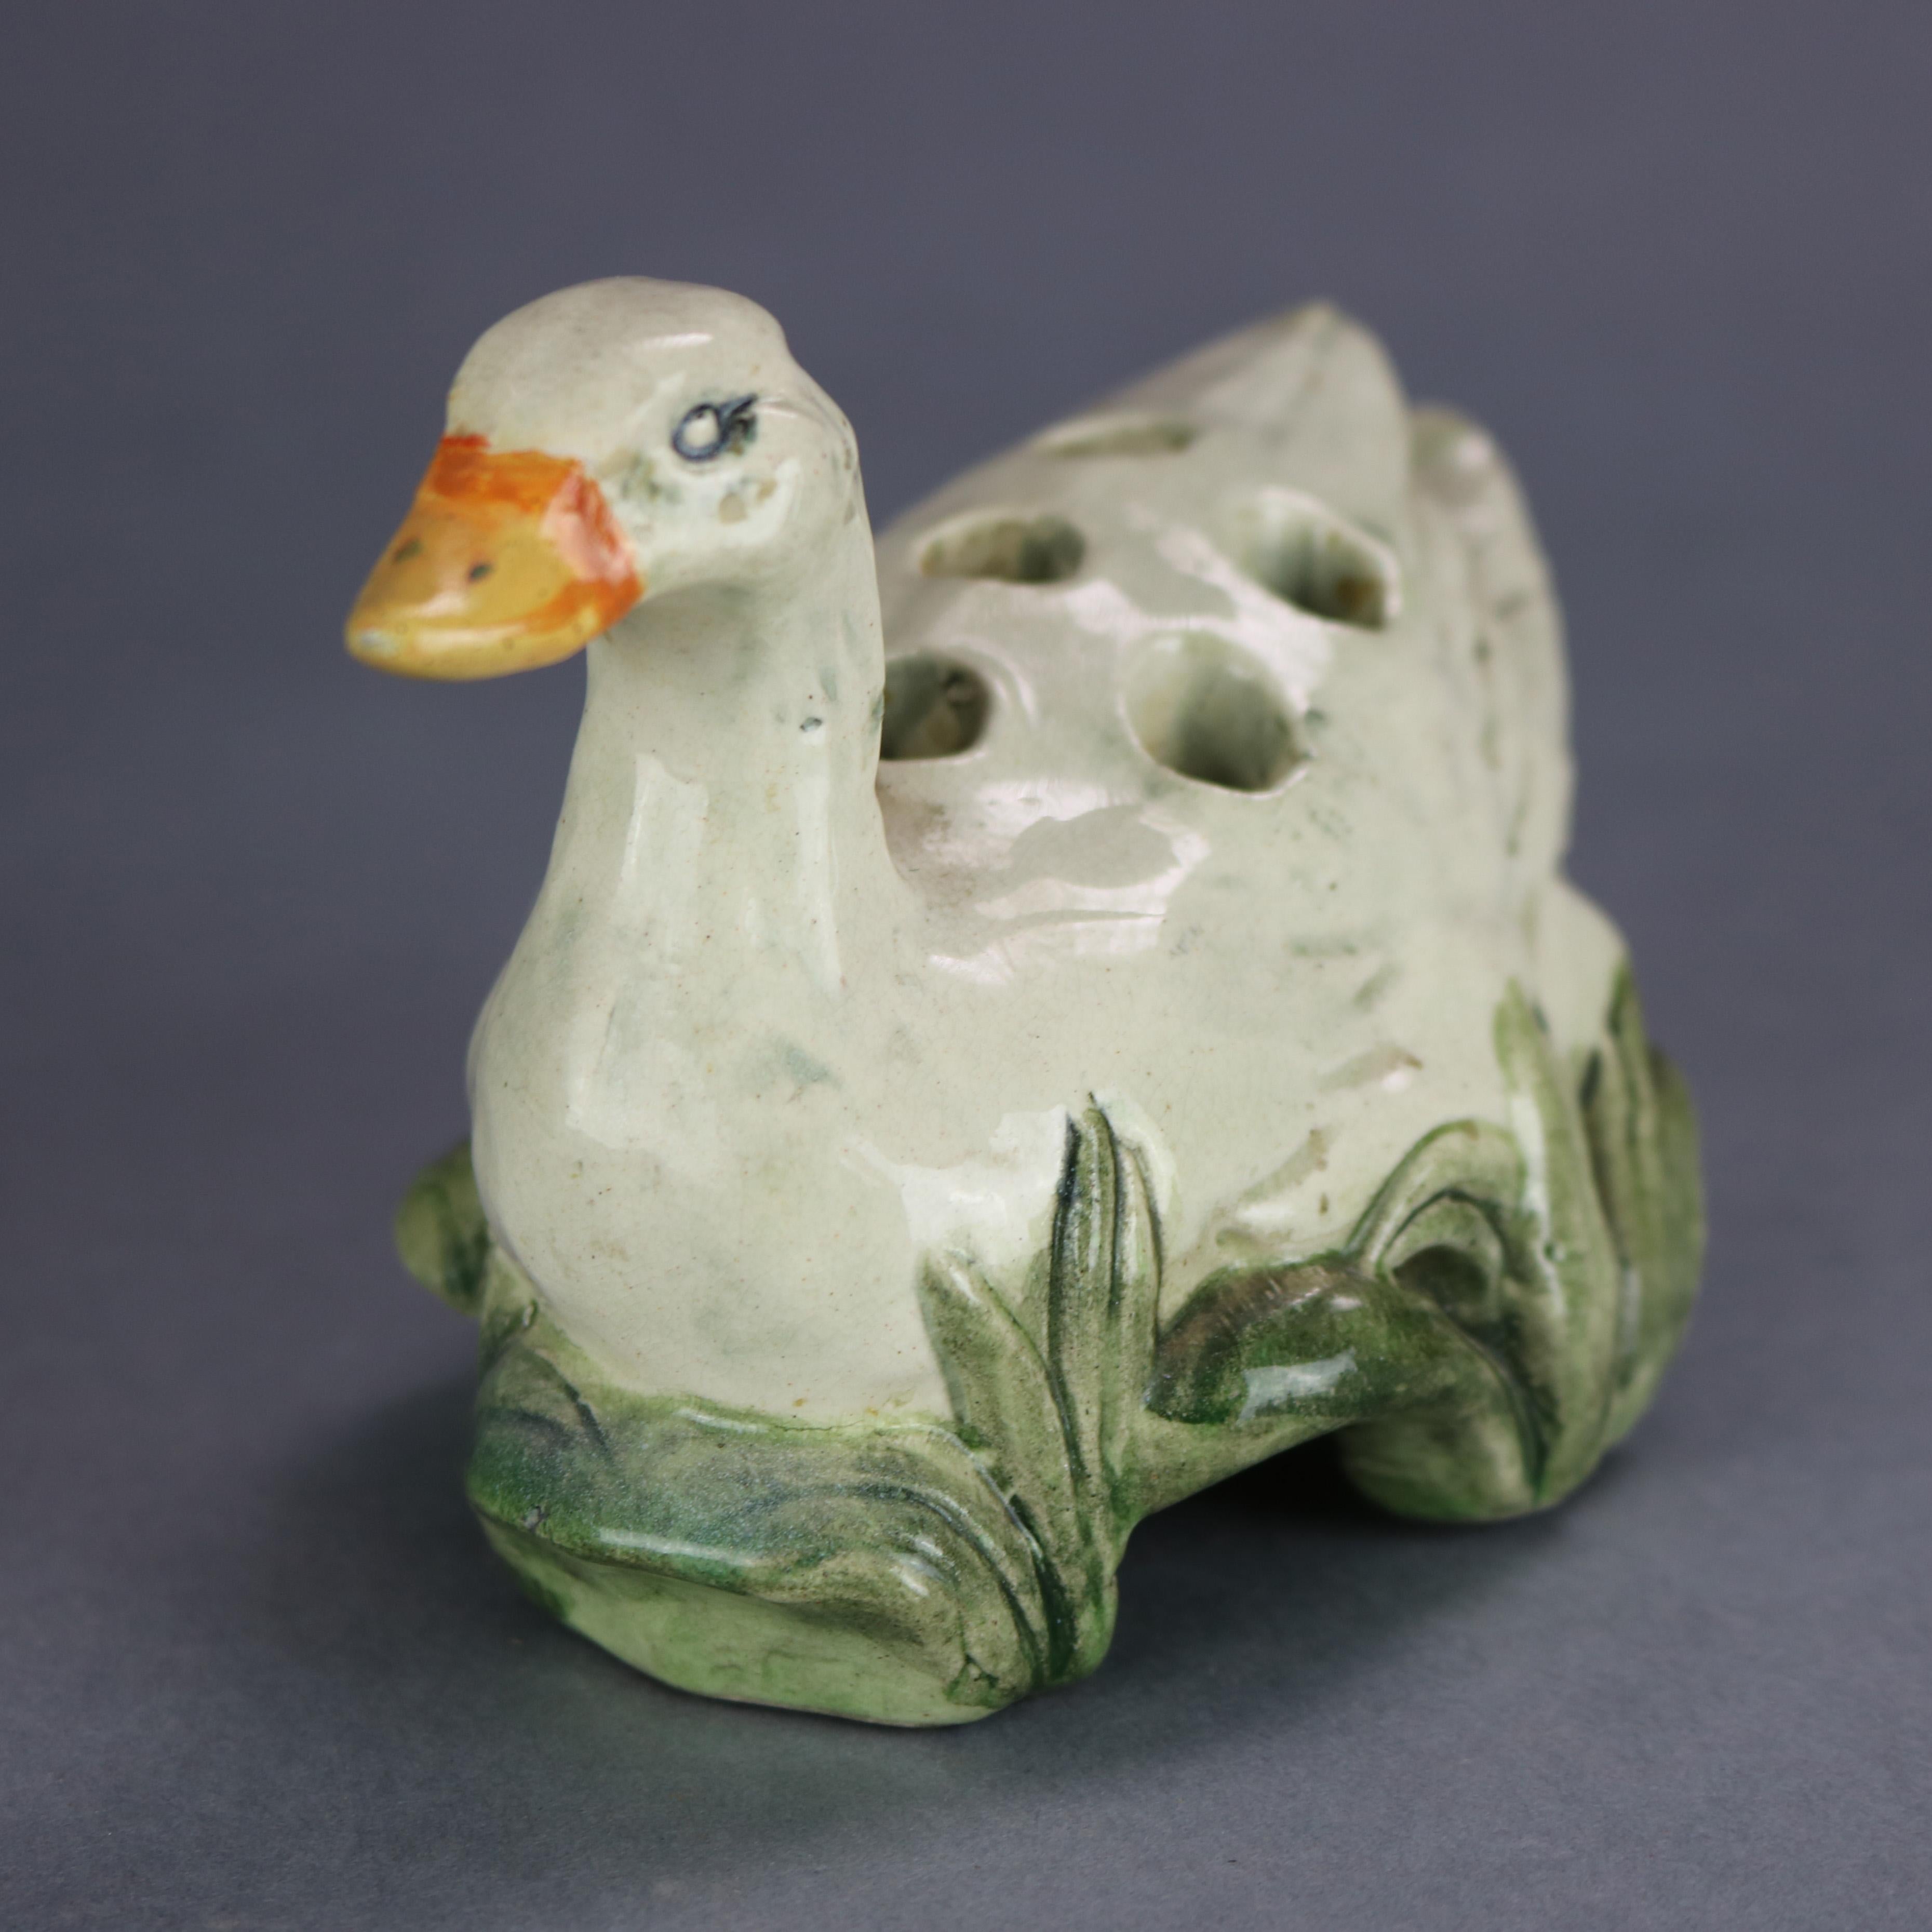 Two vintage Weller Brighton art pottery figural flower frogs, swan and duck, signed on bases as photographed, c1930

Measures: Swan: 4